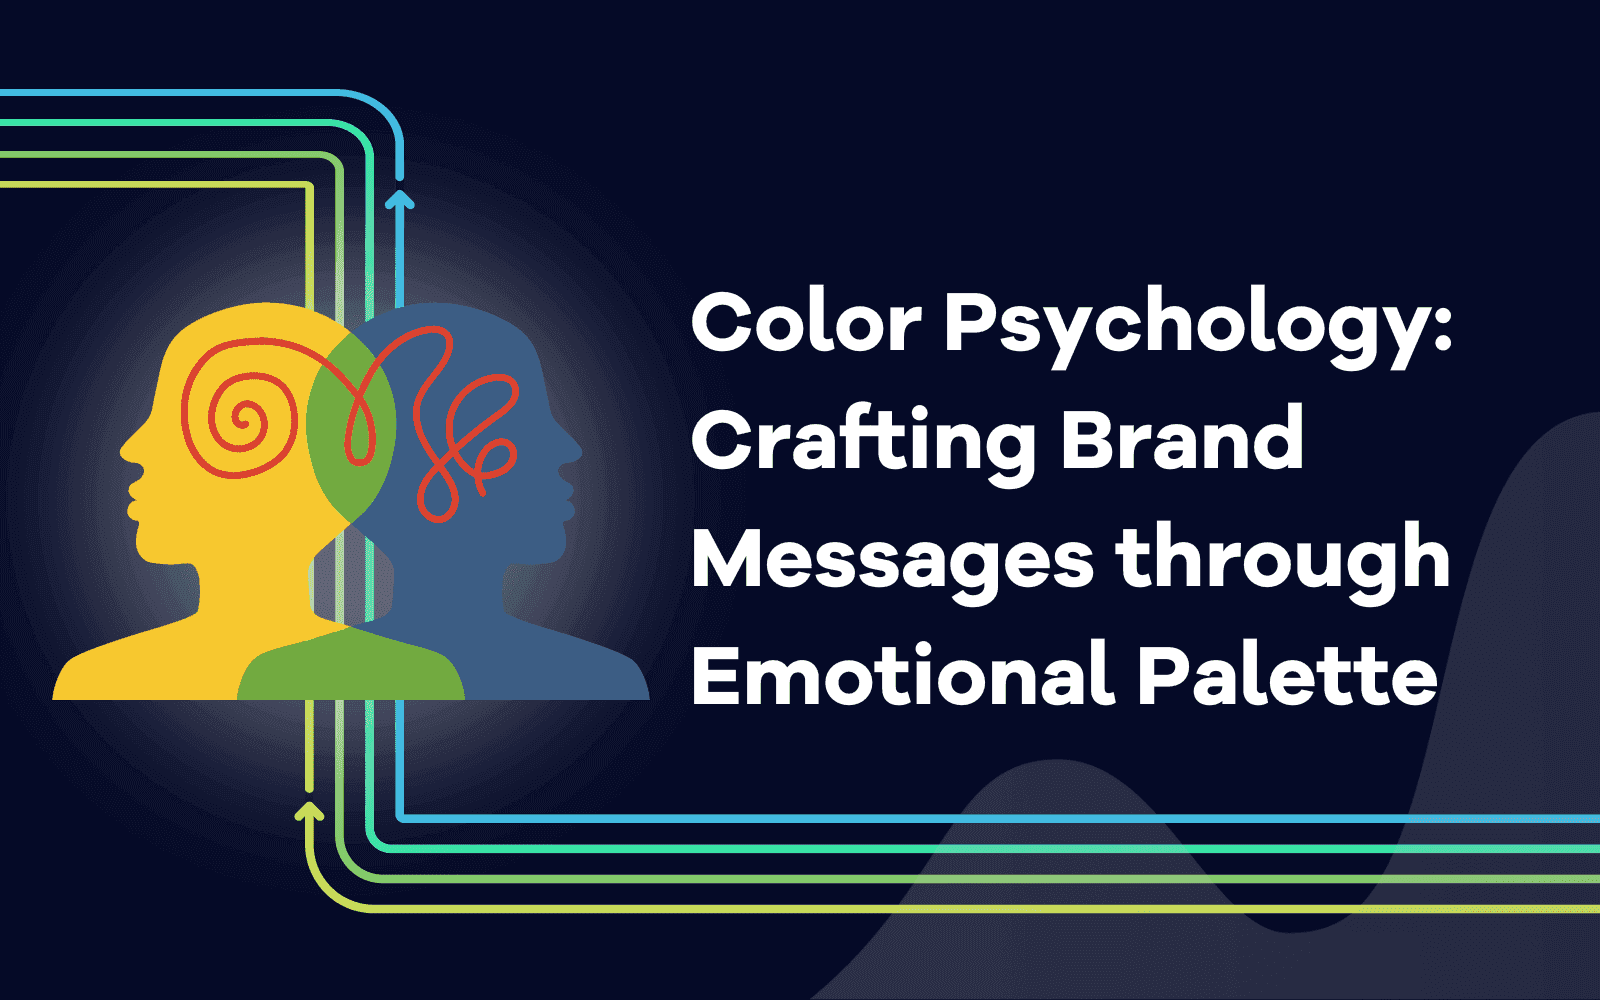 Color Psychology: Crafting Brand Messages through Emotional Palette